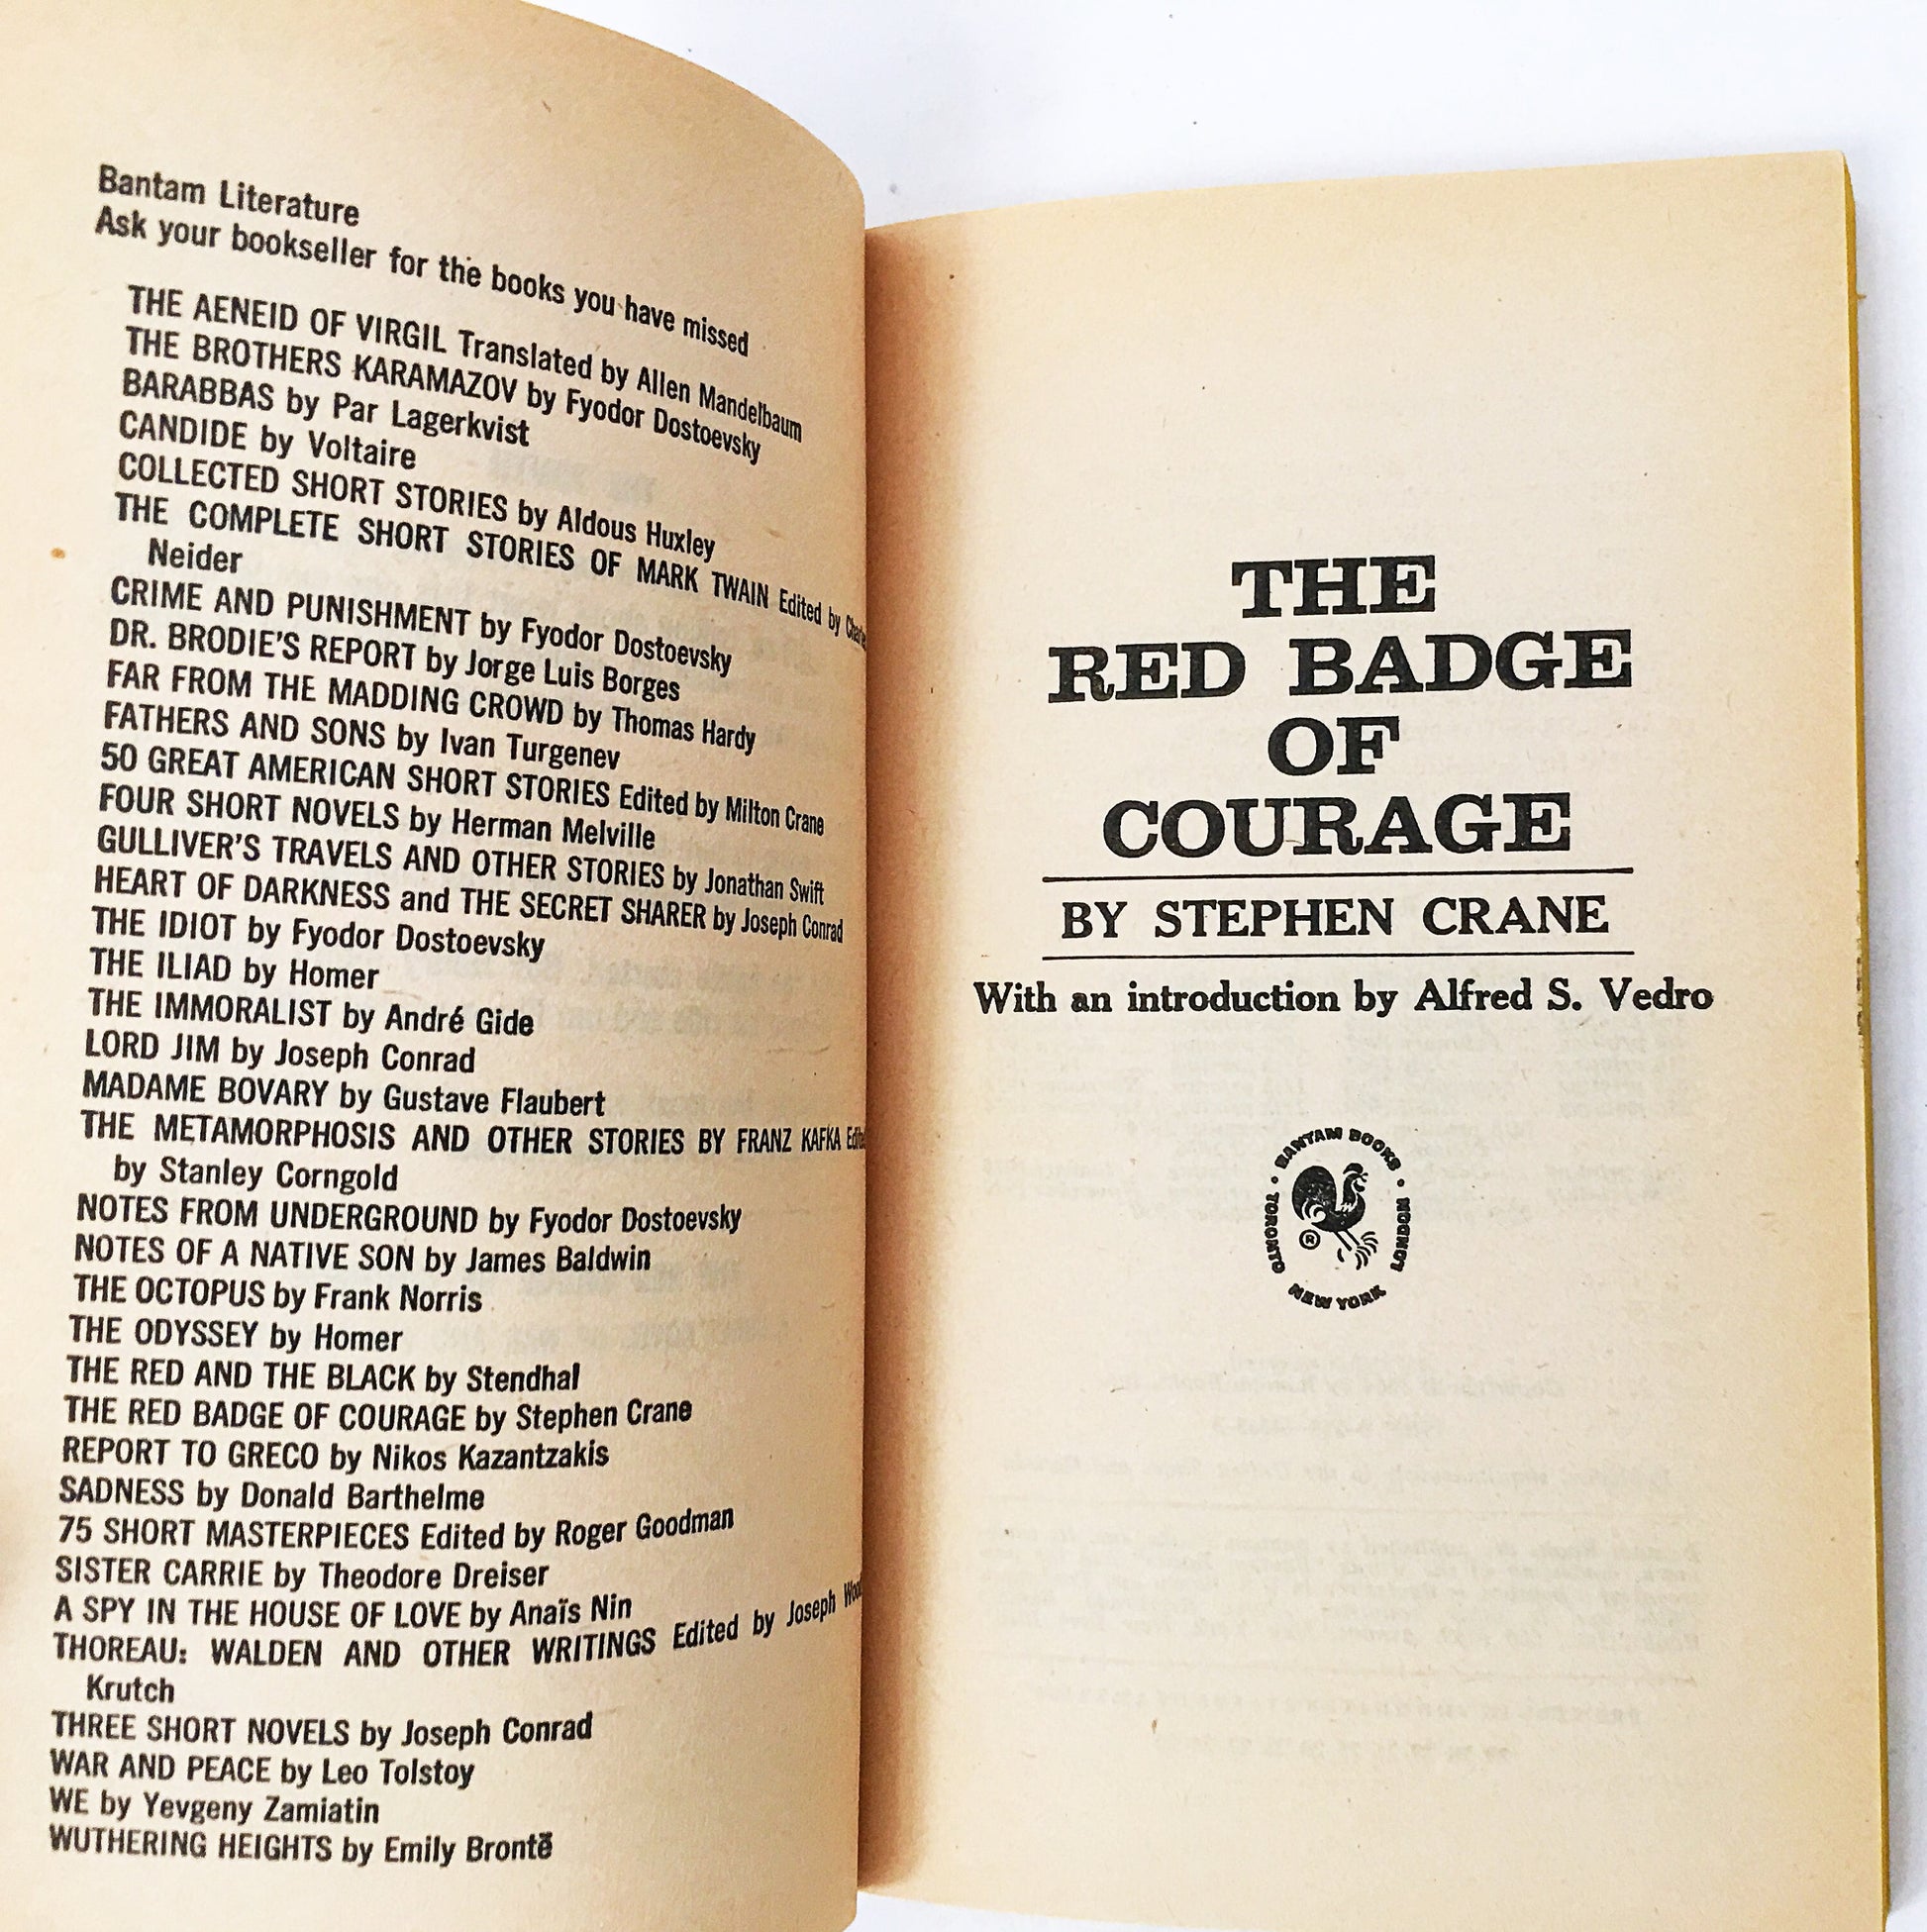 The Red Badge of Courage by Stephen Crane. Vintage Bantam book circa 1964. Overcome with shame and cowardice. Civil War. Union Confederate